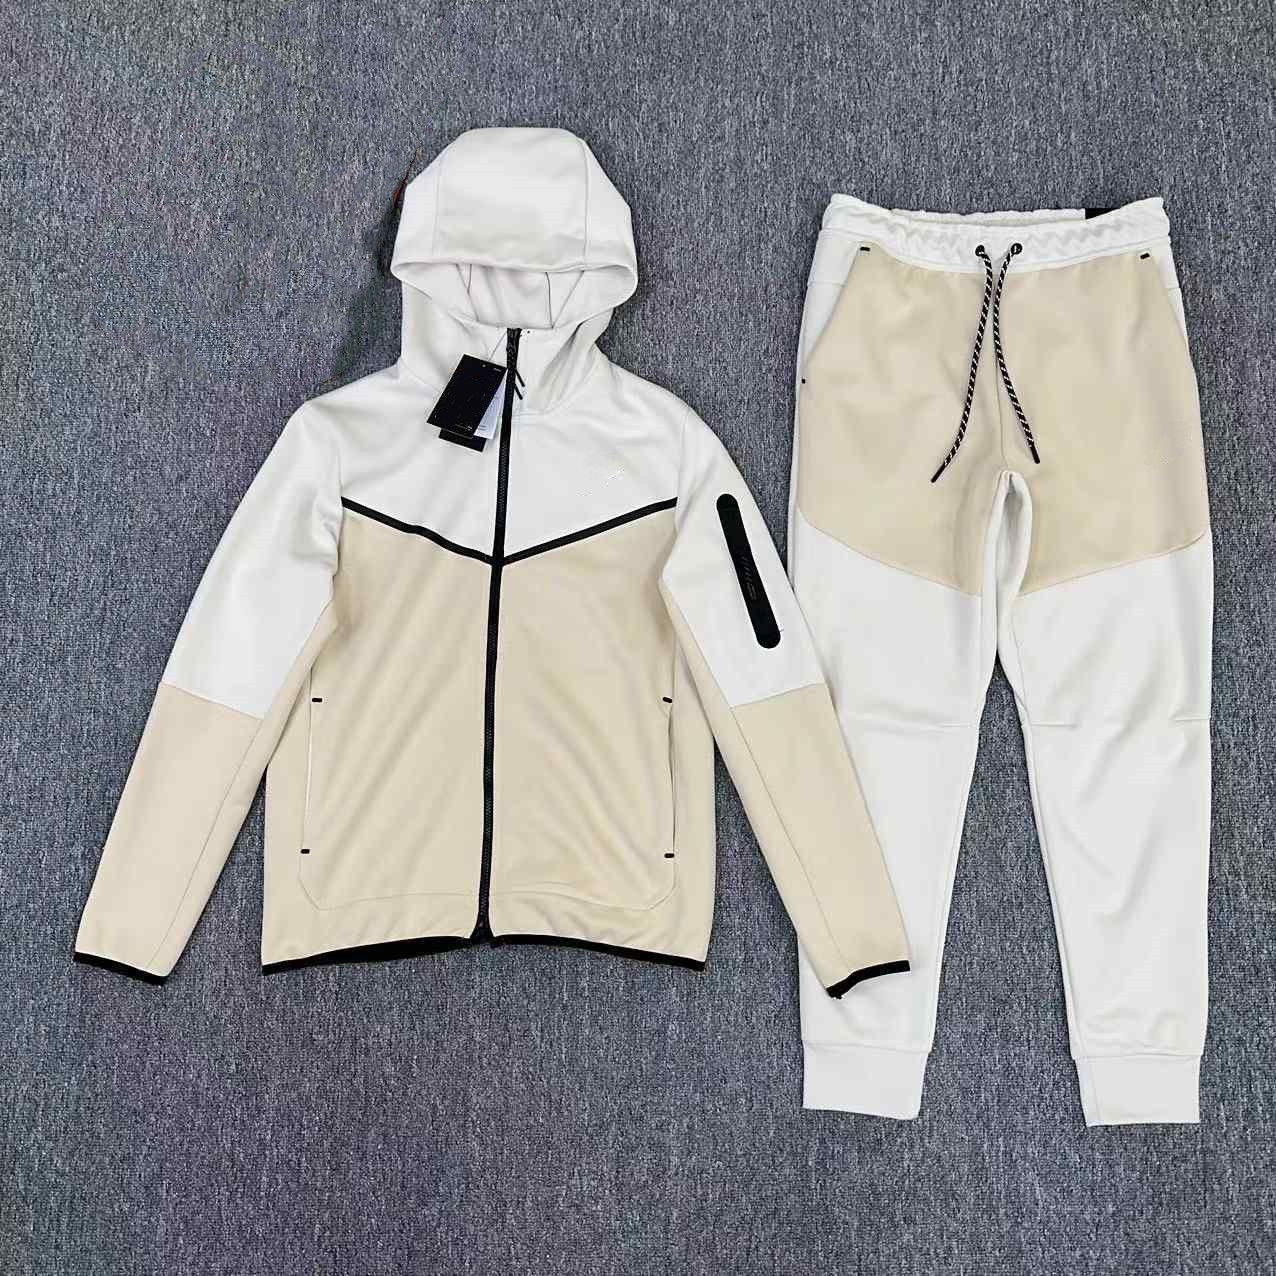 【Top Quality New Tracksuit】-2